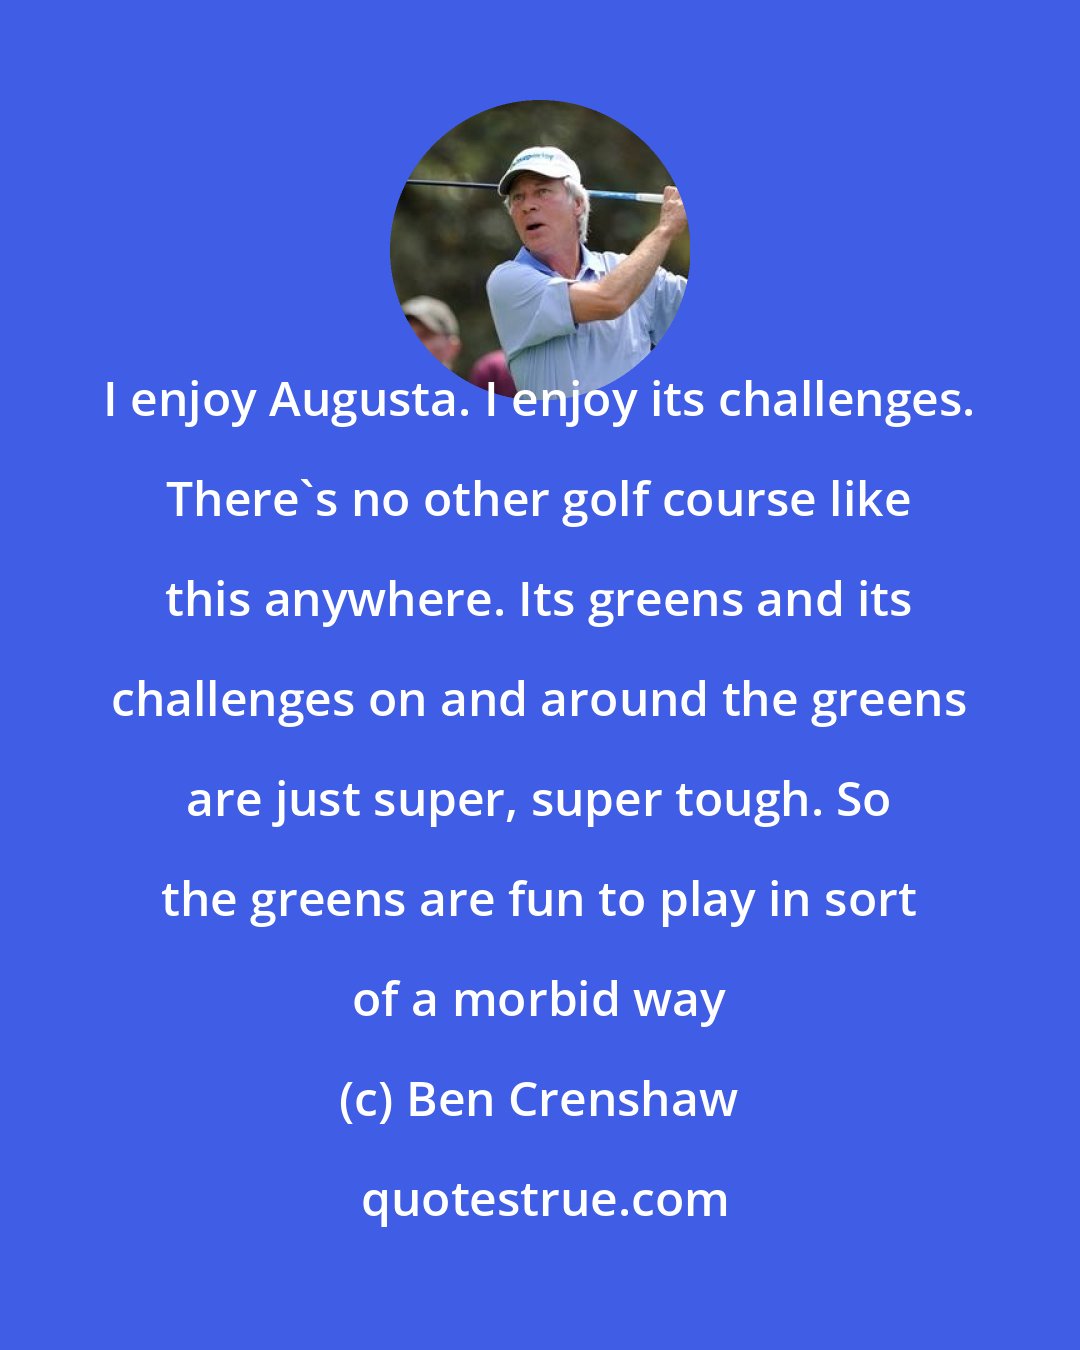 Ben Crenshaw: I enjoy Augusta. I enjoy its challenges. There's no other golf course like this anywhere. Its greens and its challenges on and around the greens are just super, super tough. So the greens are fun to play in sort of a morbid way